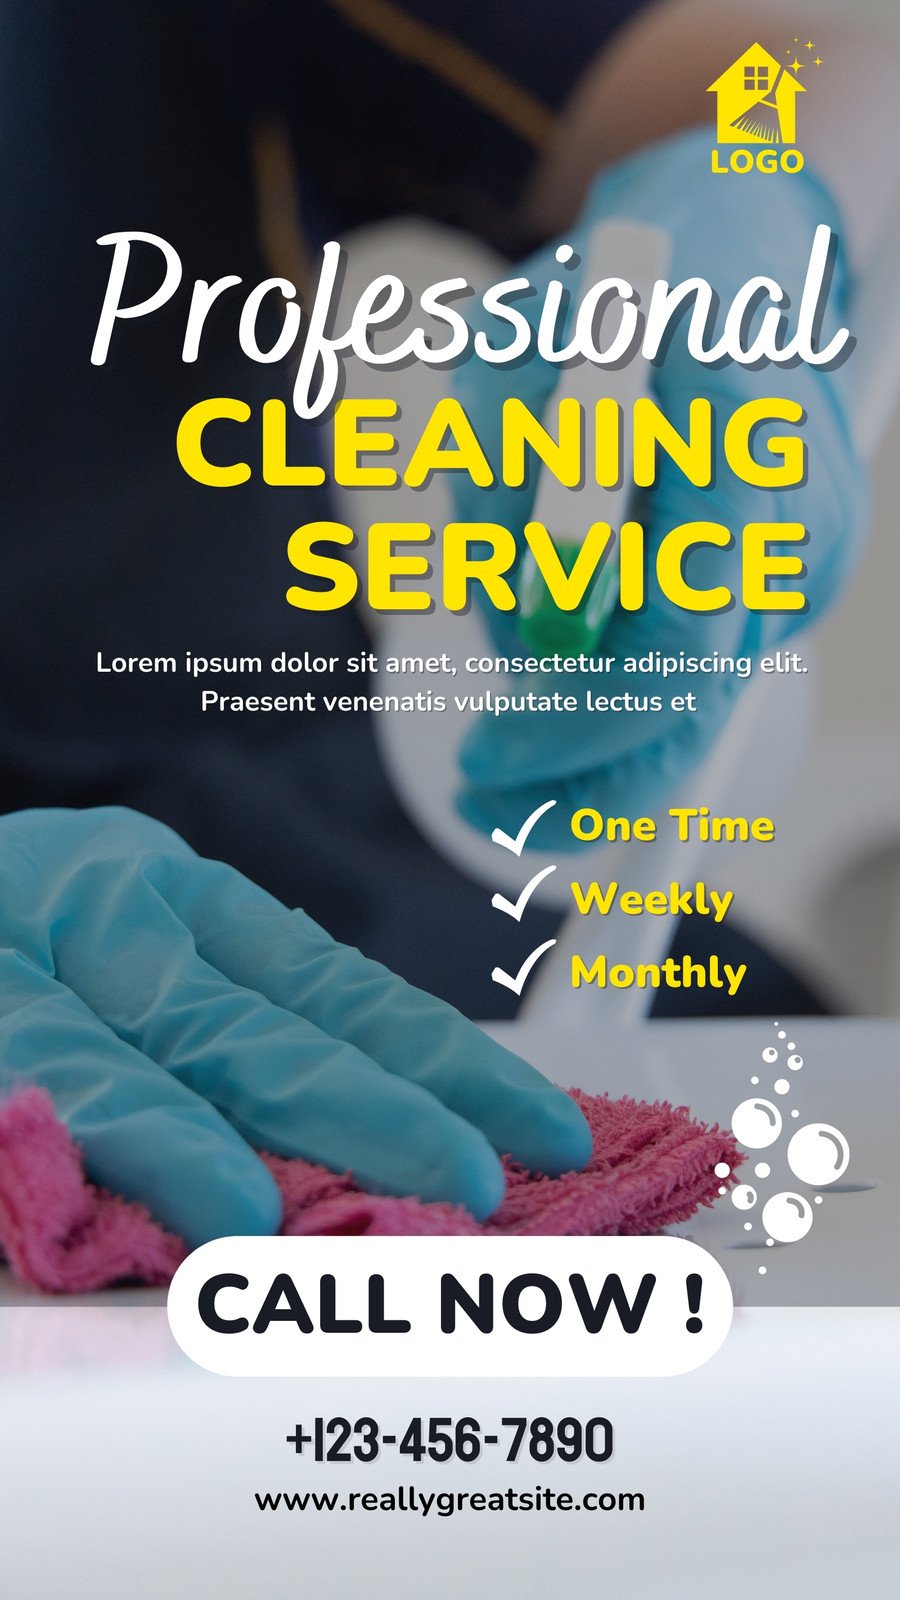 Cleaning Services Client Intake Form, Editable Residential and Commercial  Cleaning Client Form Template, Cleaning Business, Made With Canva -   Sweden